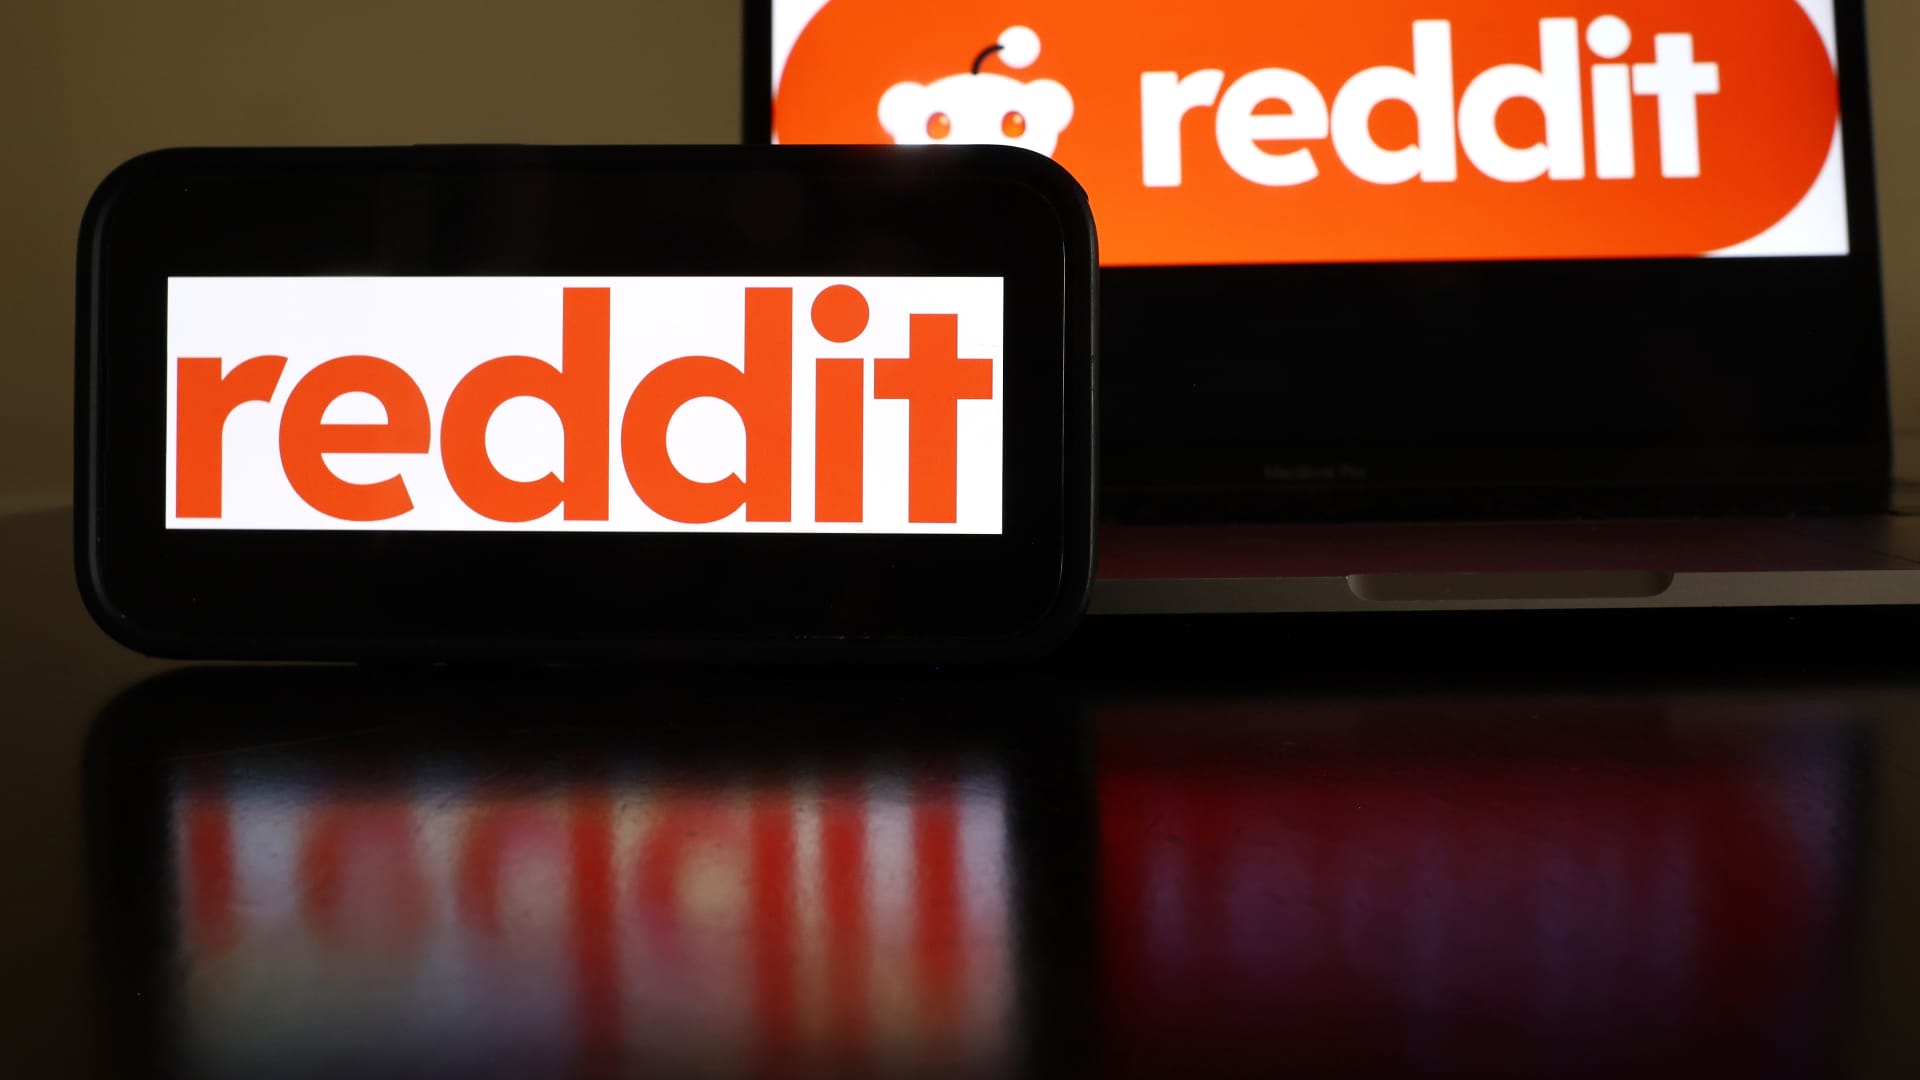 Reddit to raise nearly 0 million in upcoming IPO